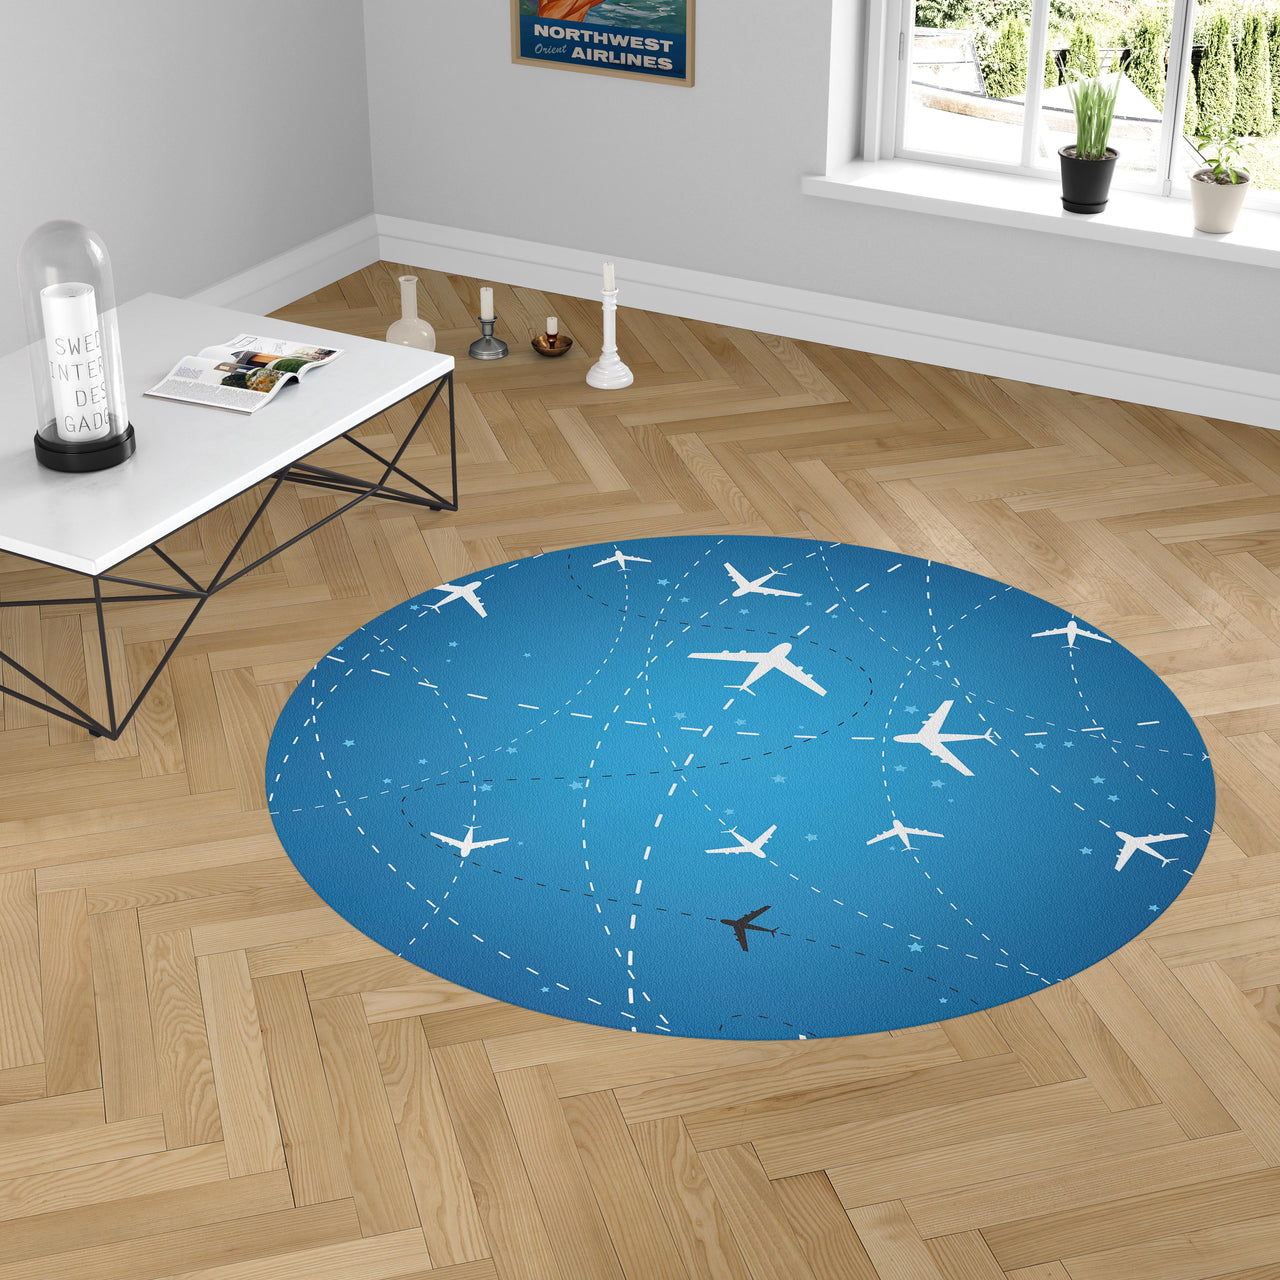 Travelling with Aircraft Designed Carpet & Floor Mats (Round)